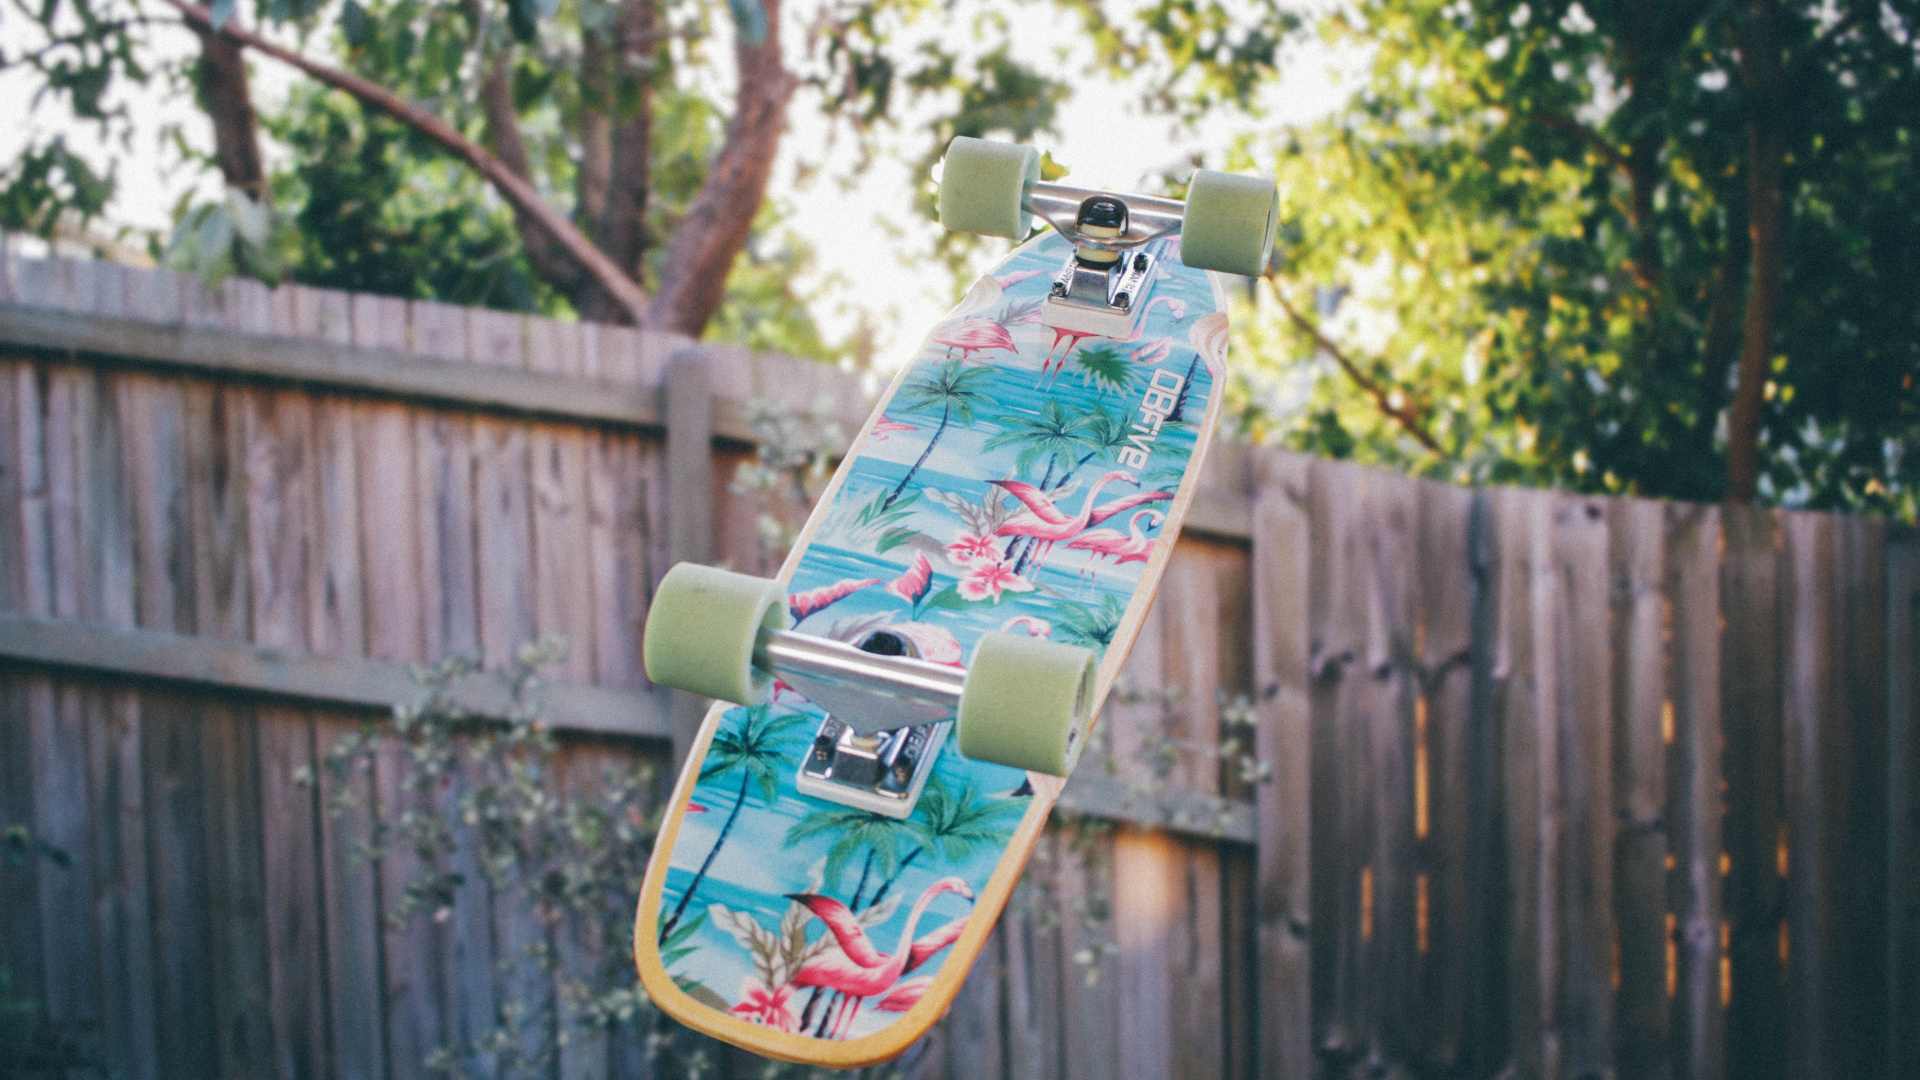 Green and Black Skateboard on Brown Wooden Fence During Daytime. Wallpaper in 1920x1080 Resolution